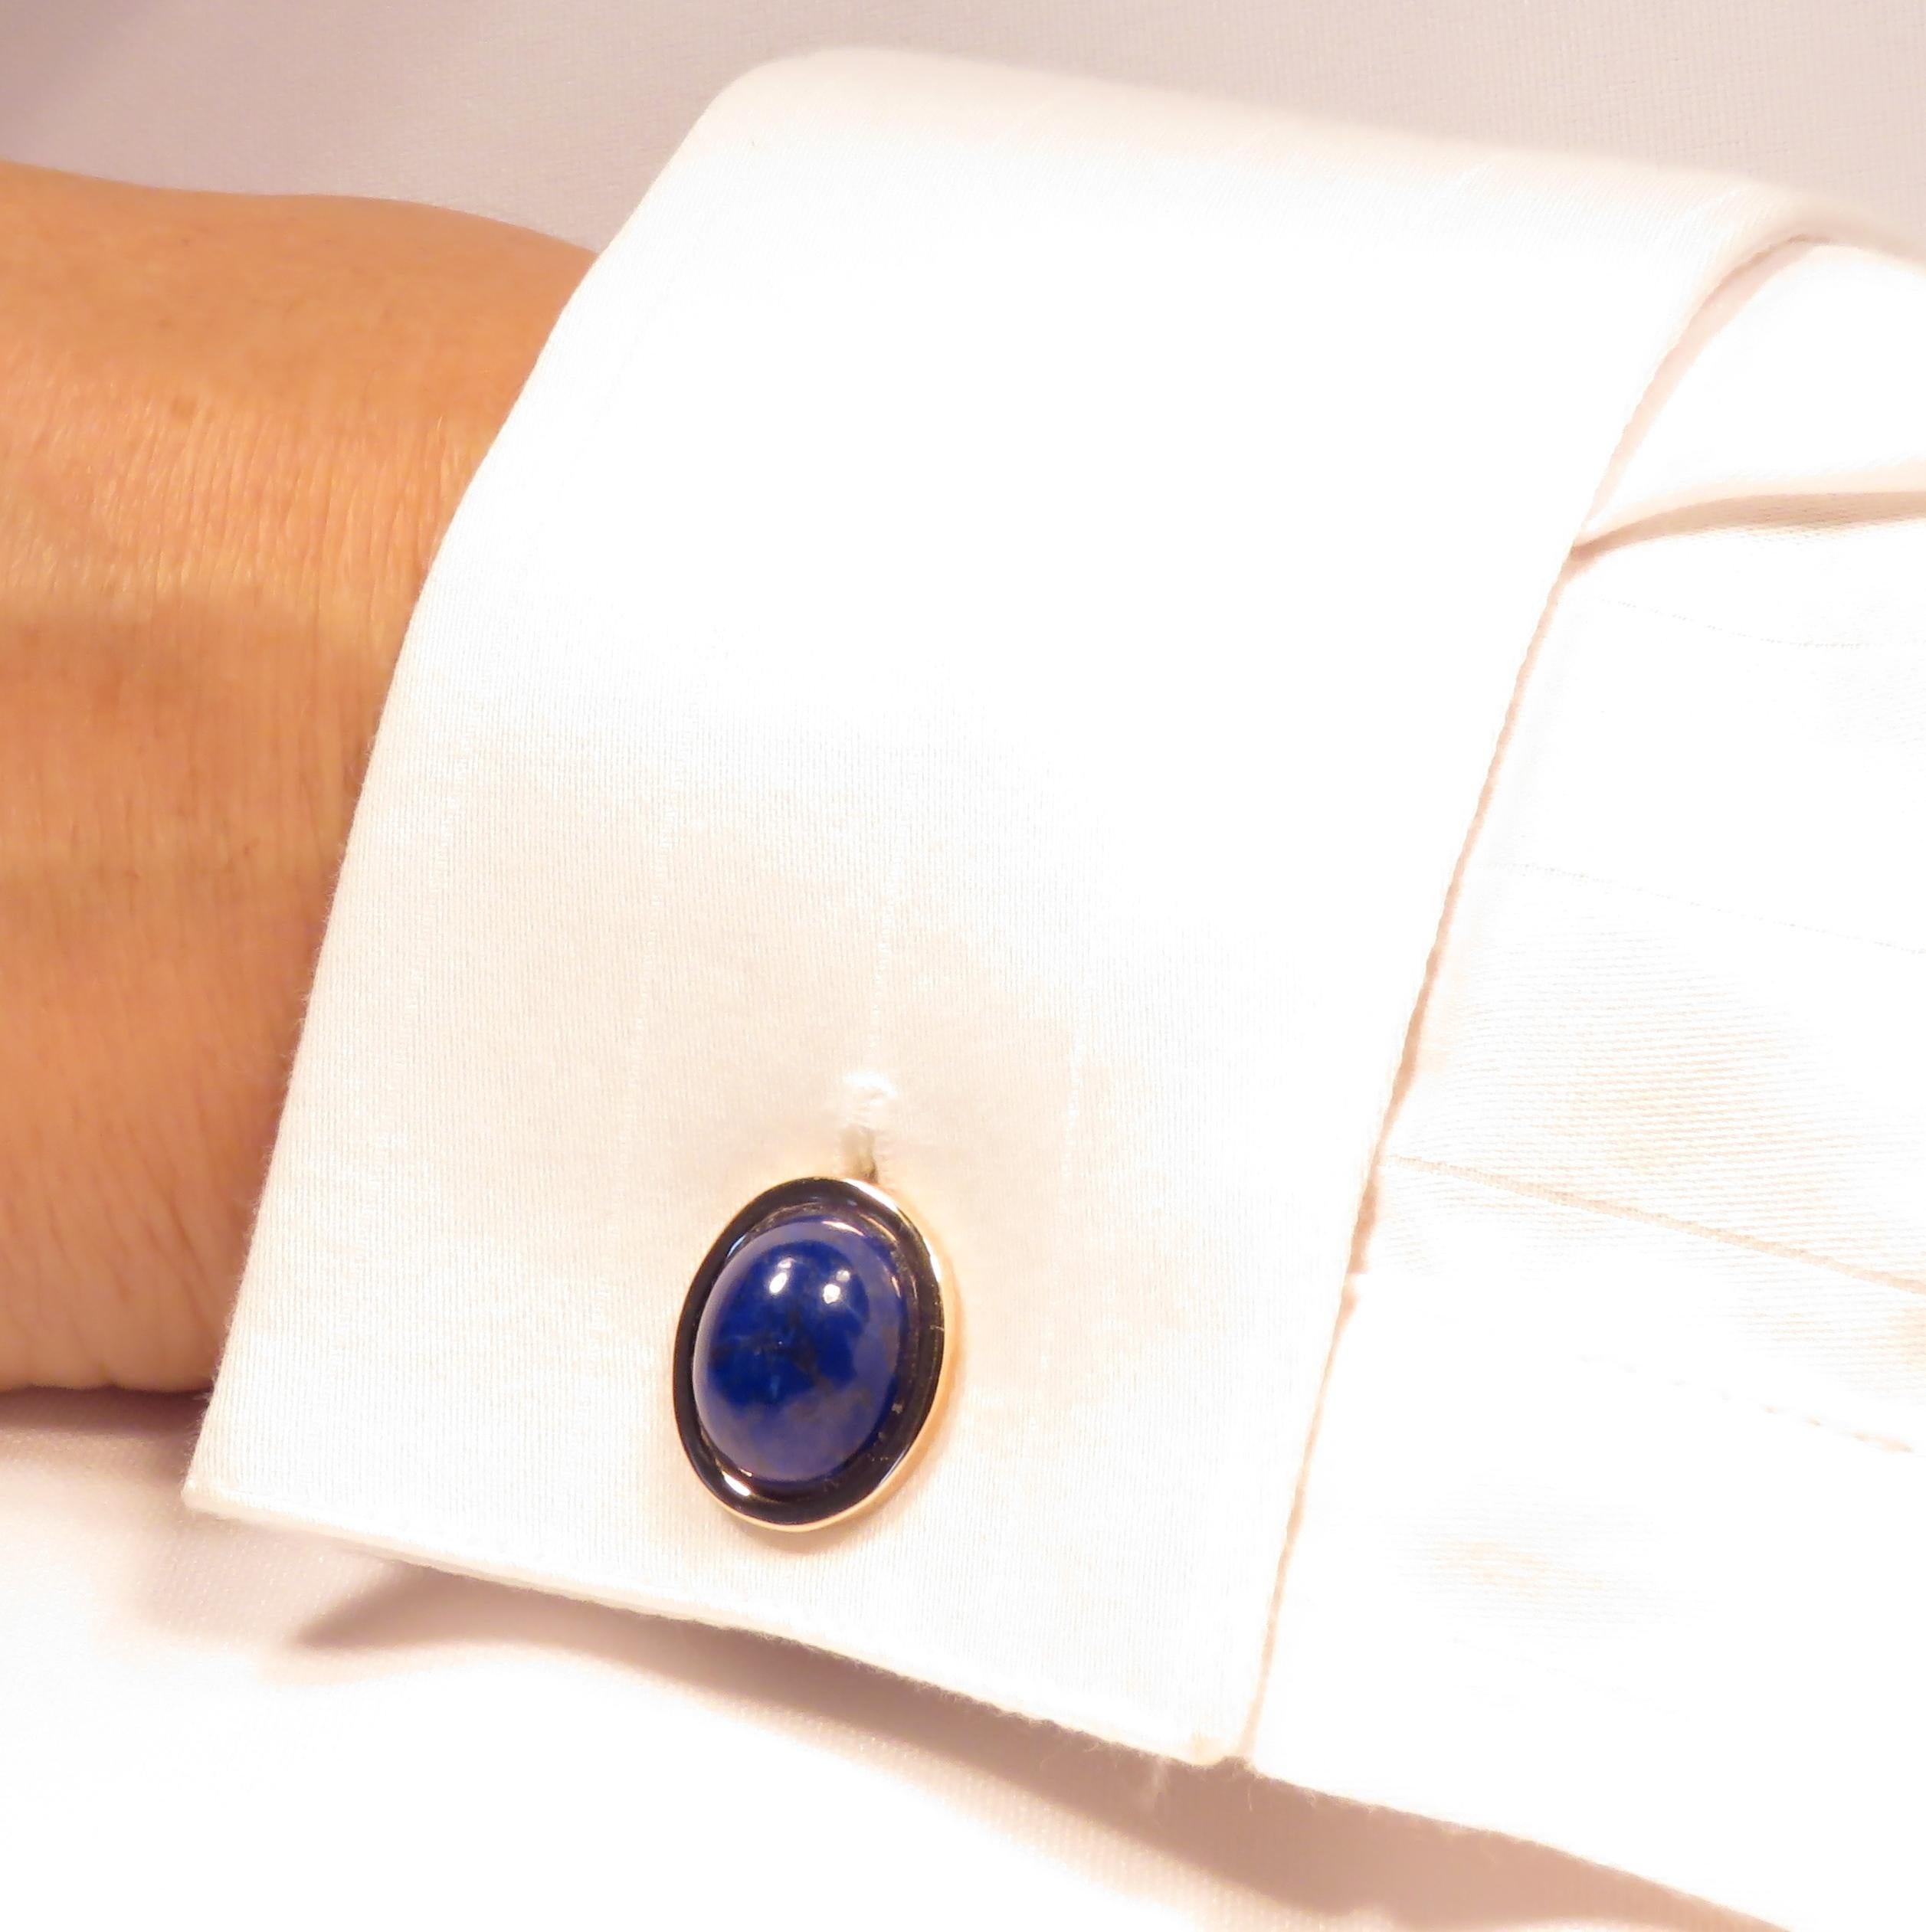 Beautiful cufflinks crafted in 9 karat white gold with two natural cabochon oval lapis lazuli and two natural lapis lazuli beads. Oval gemstones size is : 12x8 mm / 0.472x0.314 inches, bead size is; 10 mm / 0.393 inches. Marked with the Italian Gold